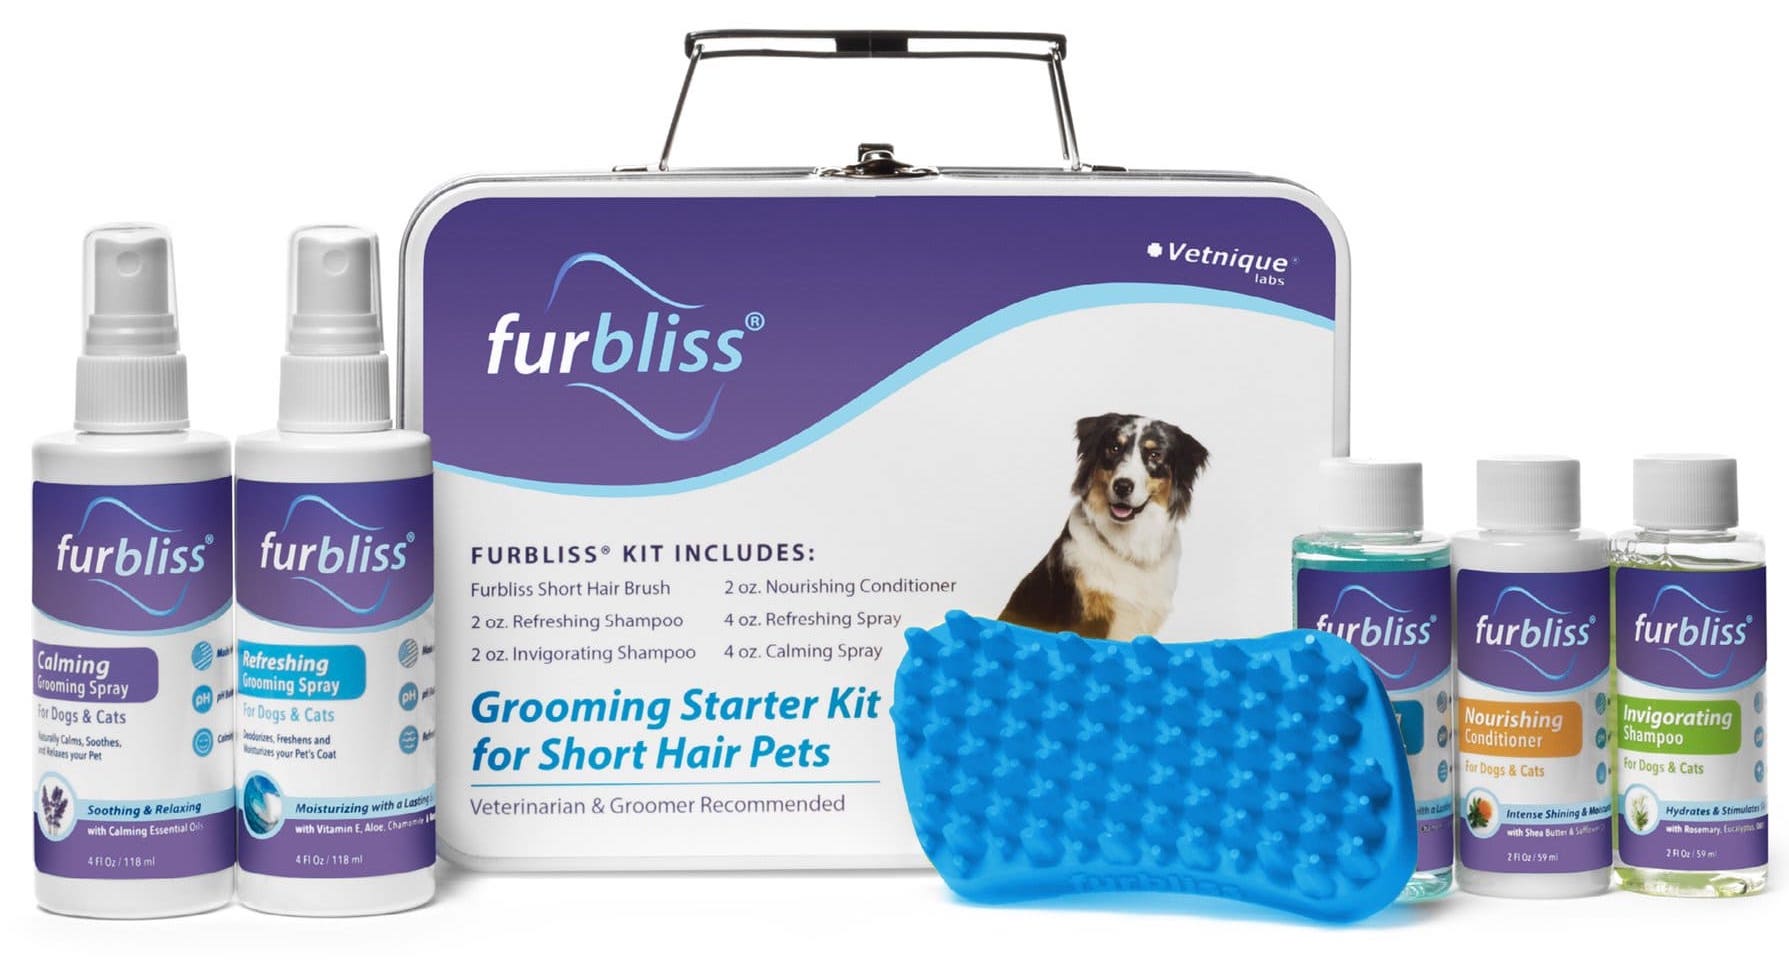 Furbliss Grooming & Bathing Kit 1 count for pets with short hair 1